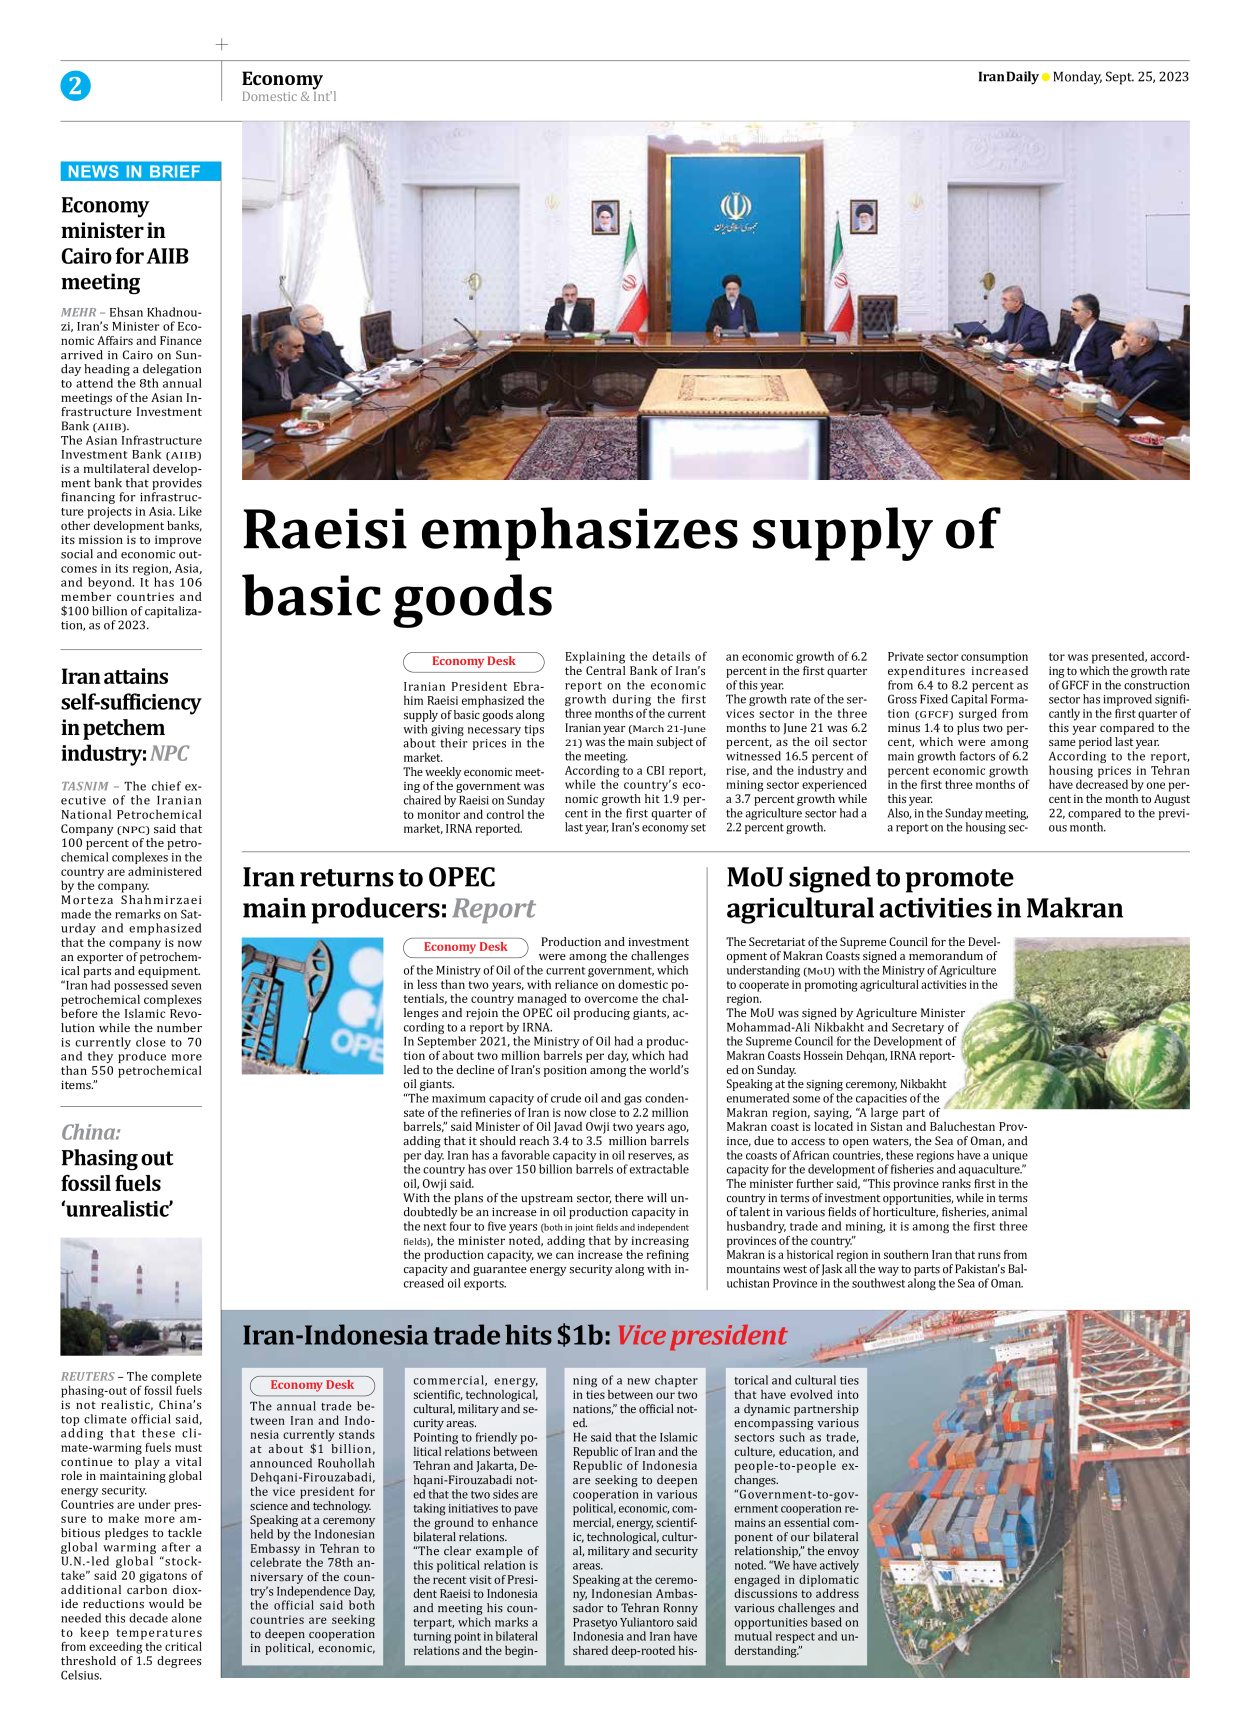 Iran Daily - Number Seven Thousand Three Hundred and Ninety Two - 25 September 2023 - Page 2